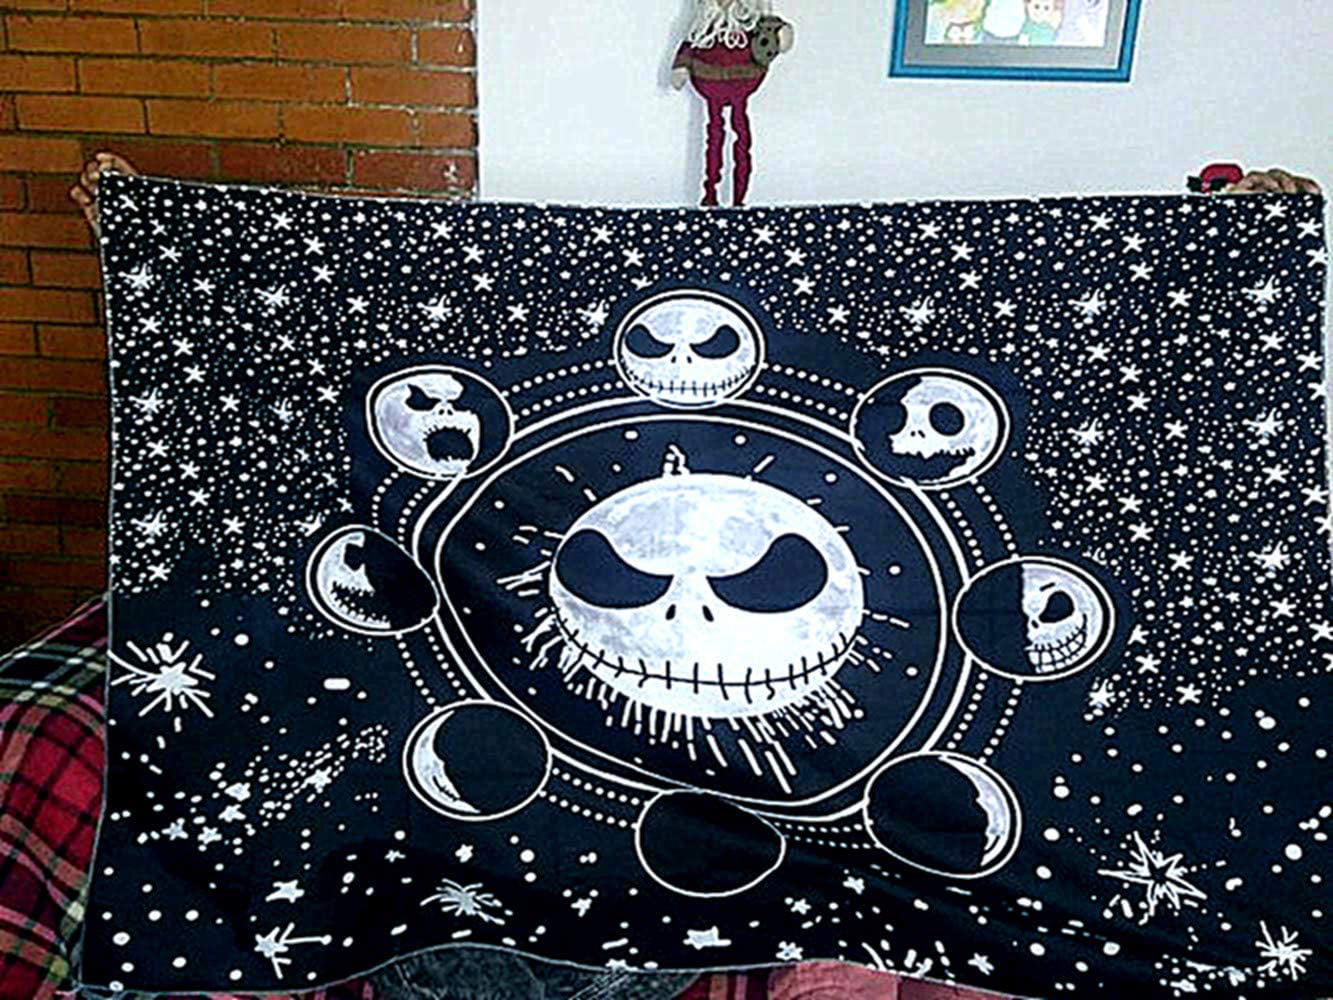 Onzutz Nightmare Before Christmas Tapestry Wall Hanging Starry Night Sky Gift For Movie Lover Tapestry Skin-Friendly Tapestry for Bedroom Aesthetic Wall Tapestry 51x59 Inches, 130x150 cm